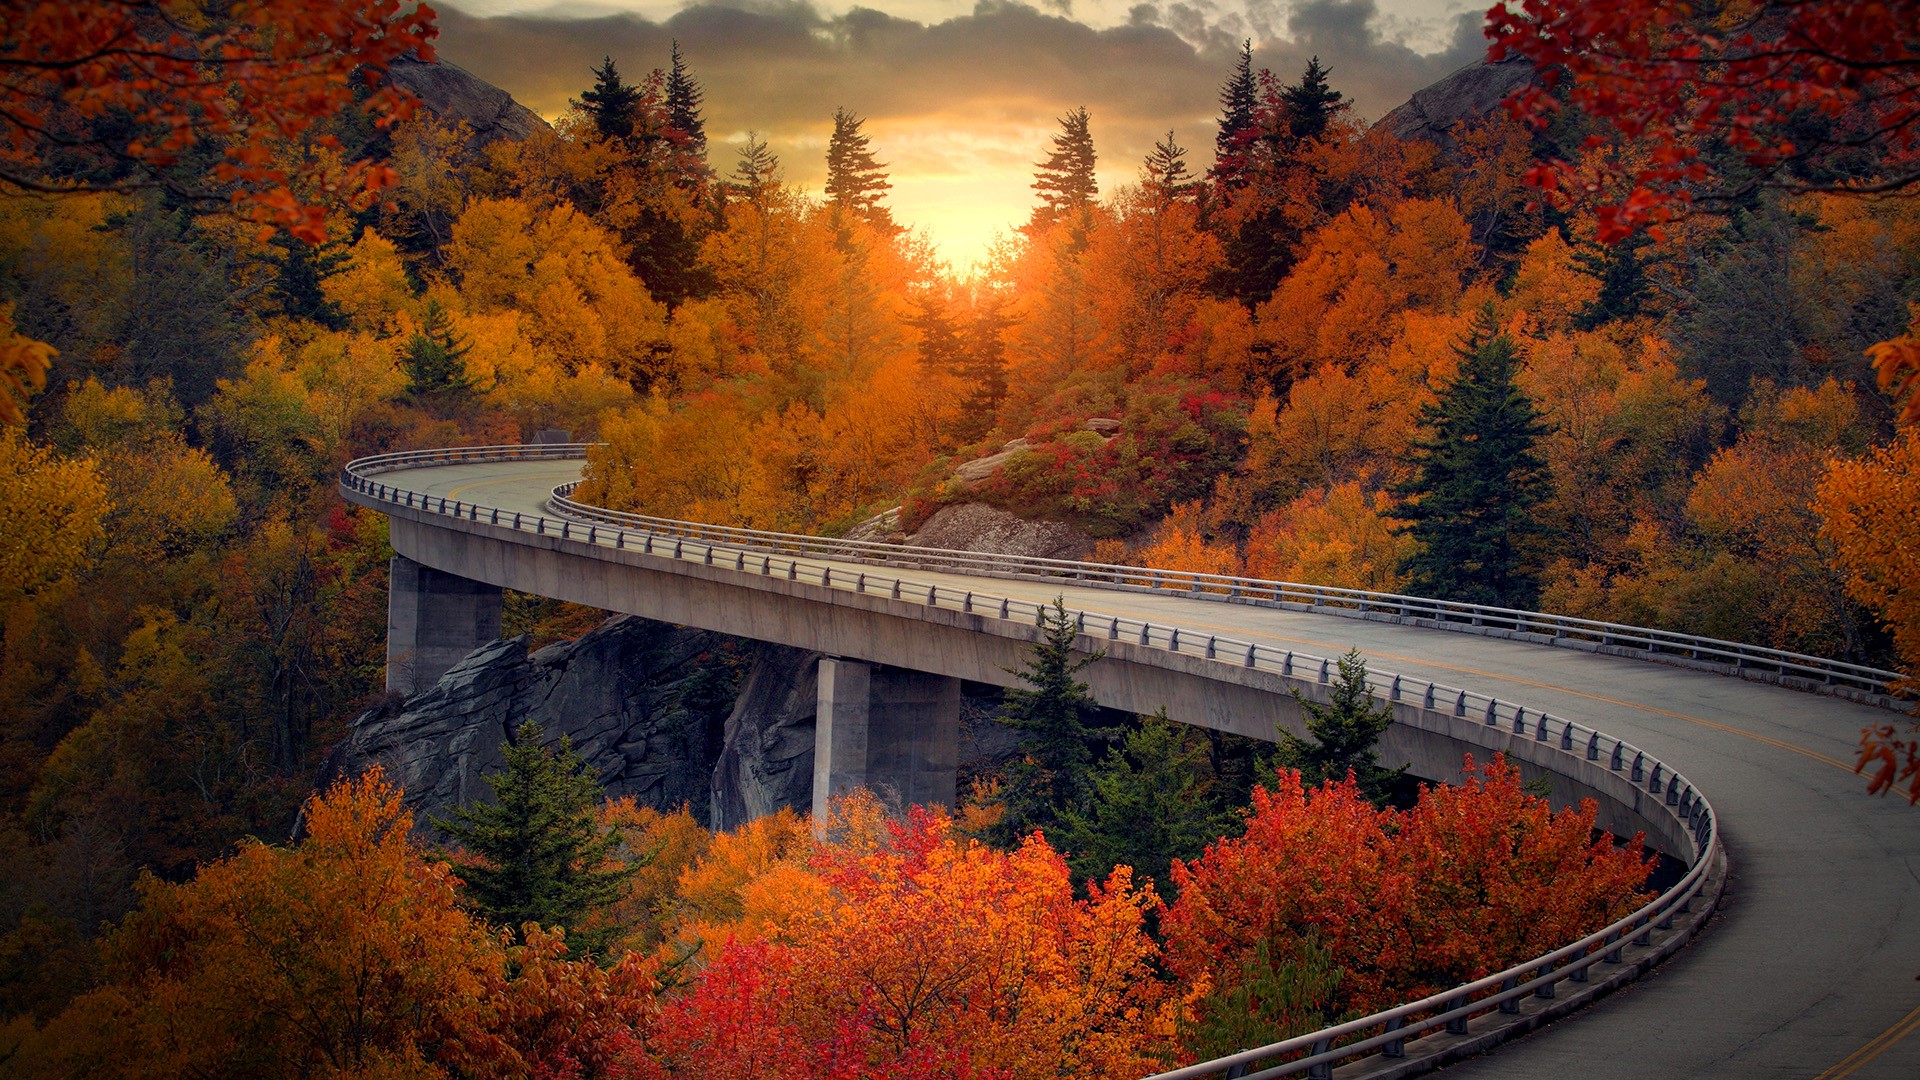 General 1920x1080 nature landscape fall trees bridge clouds sky mountains forest road rocks USA Linn Cove Viaduct